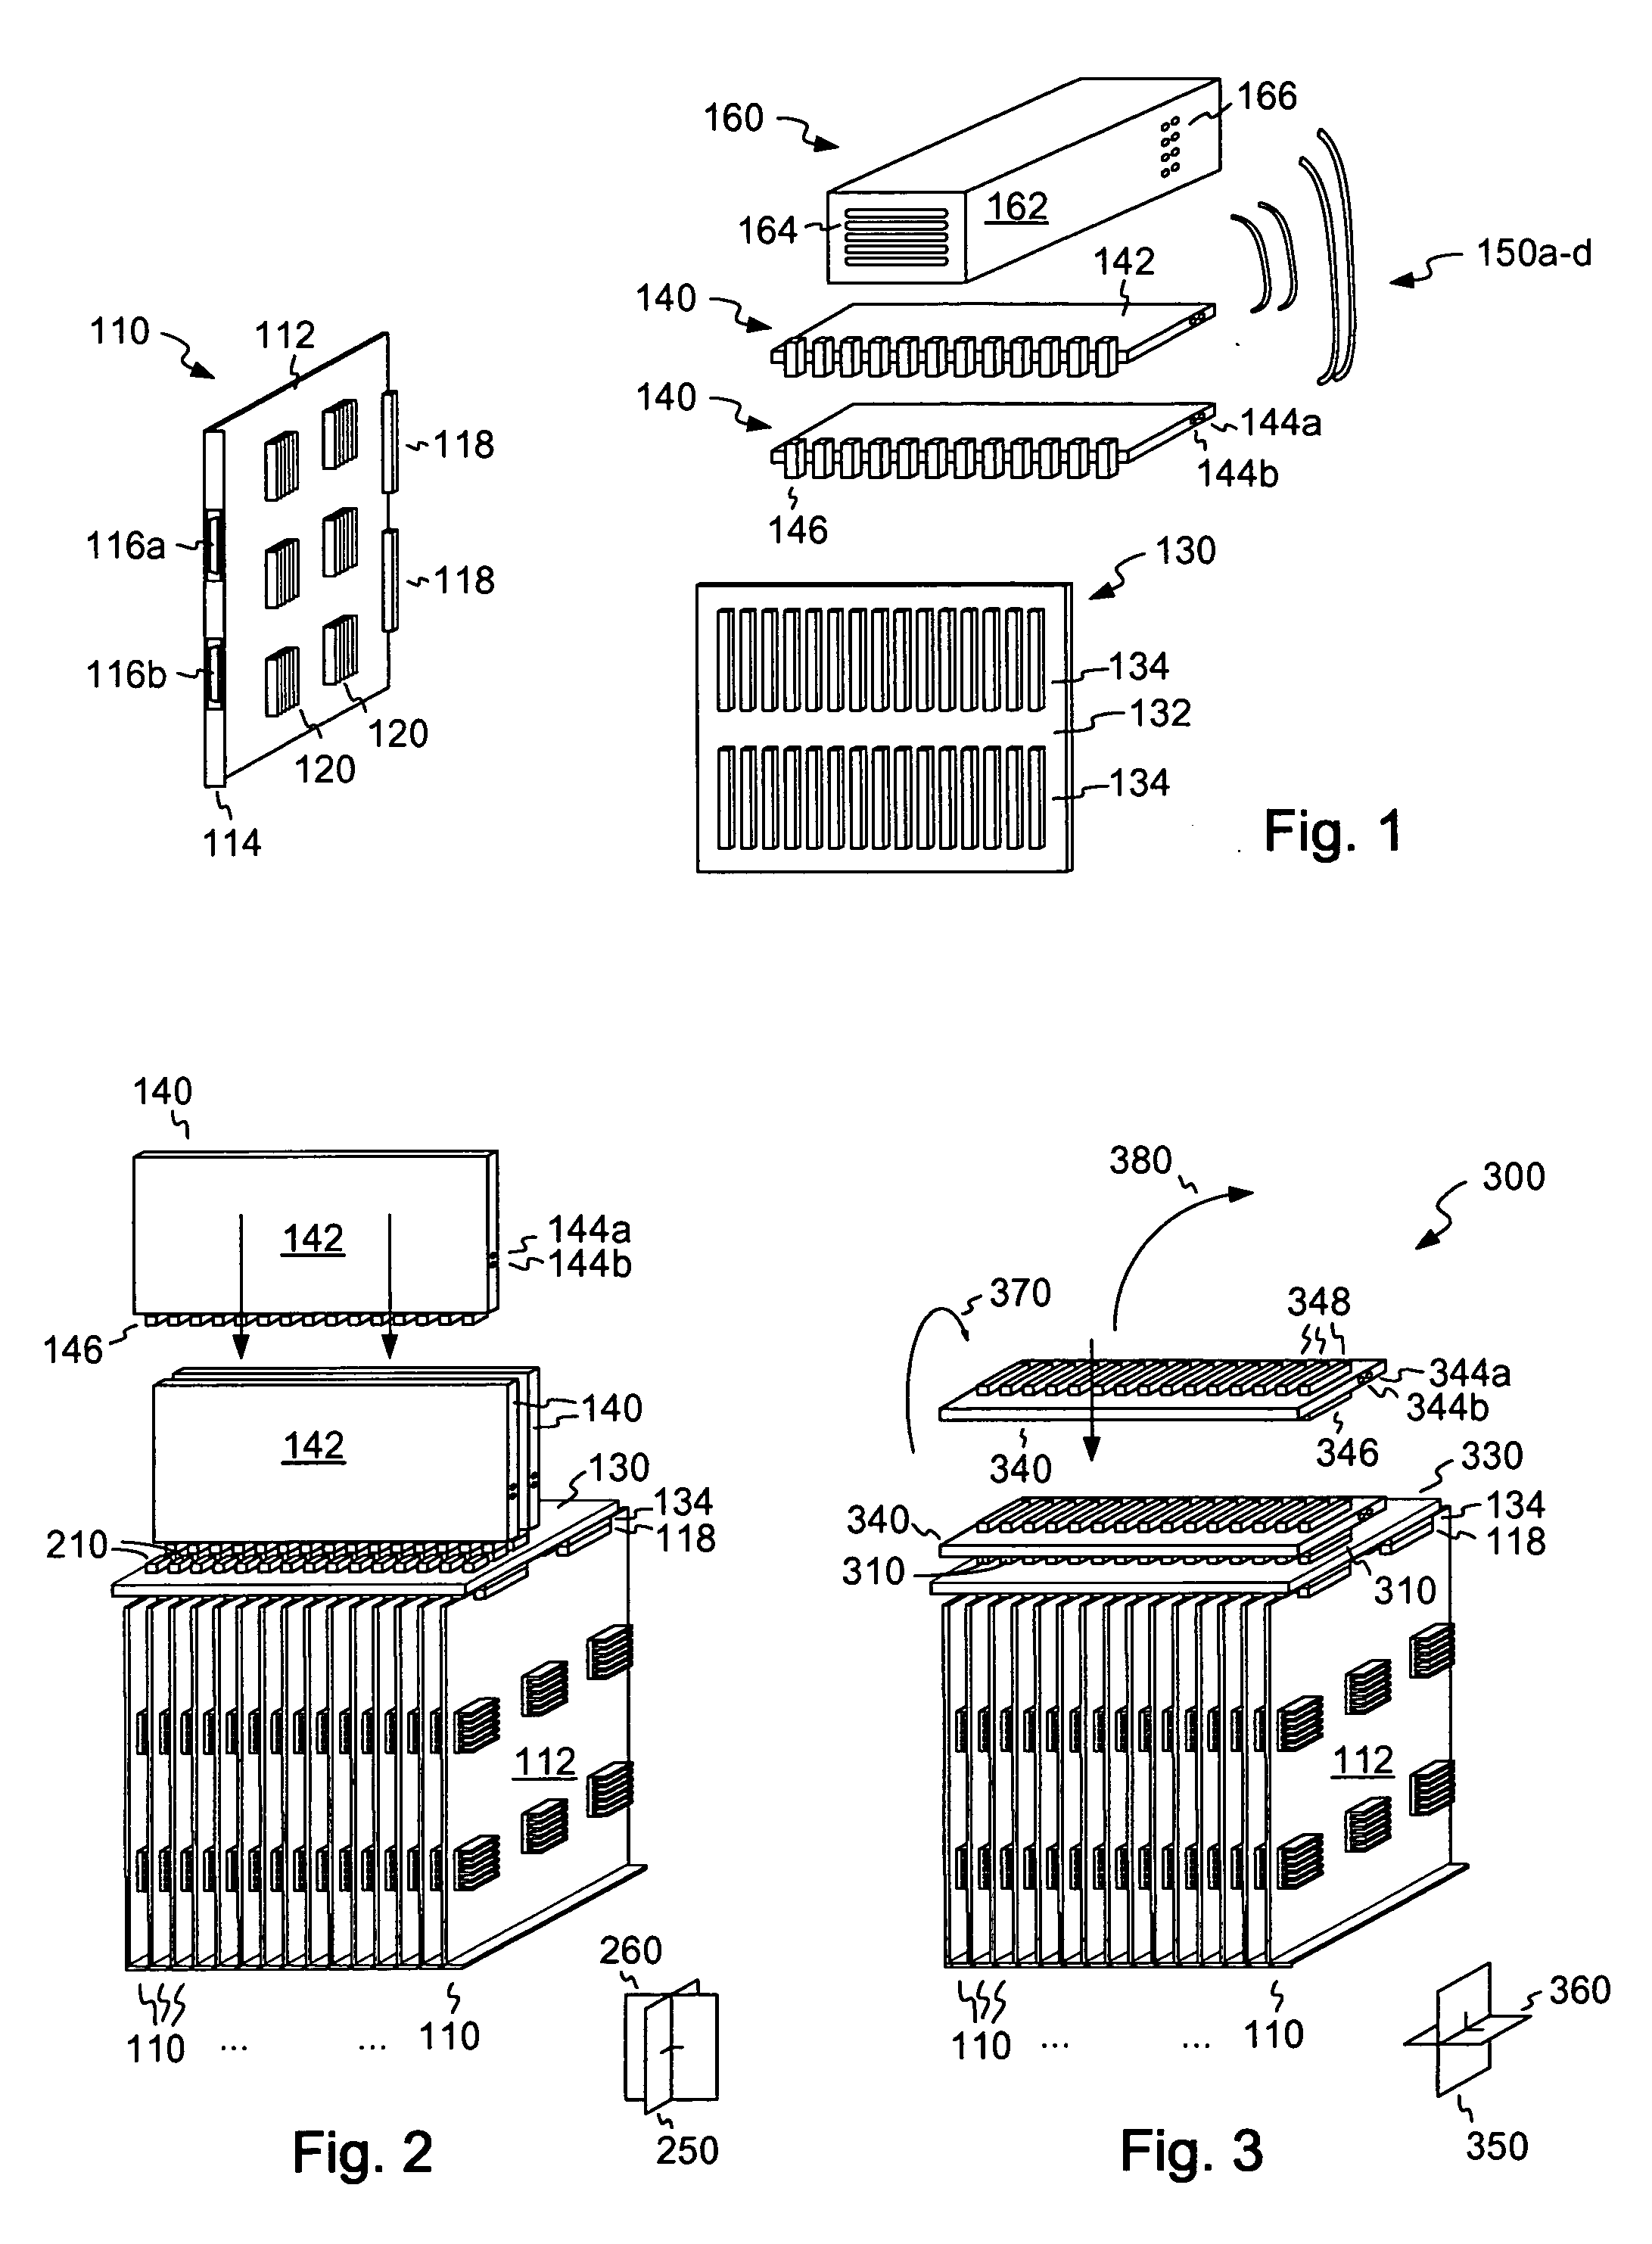 Electronic system with non-parallel arrays of circuit card assemblies